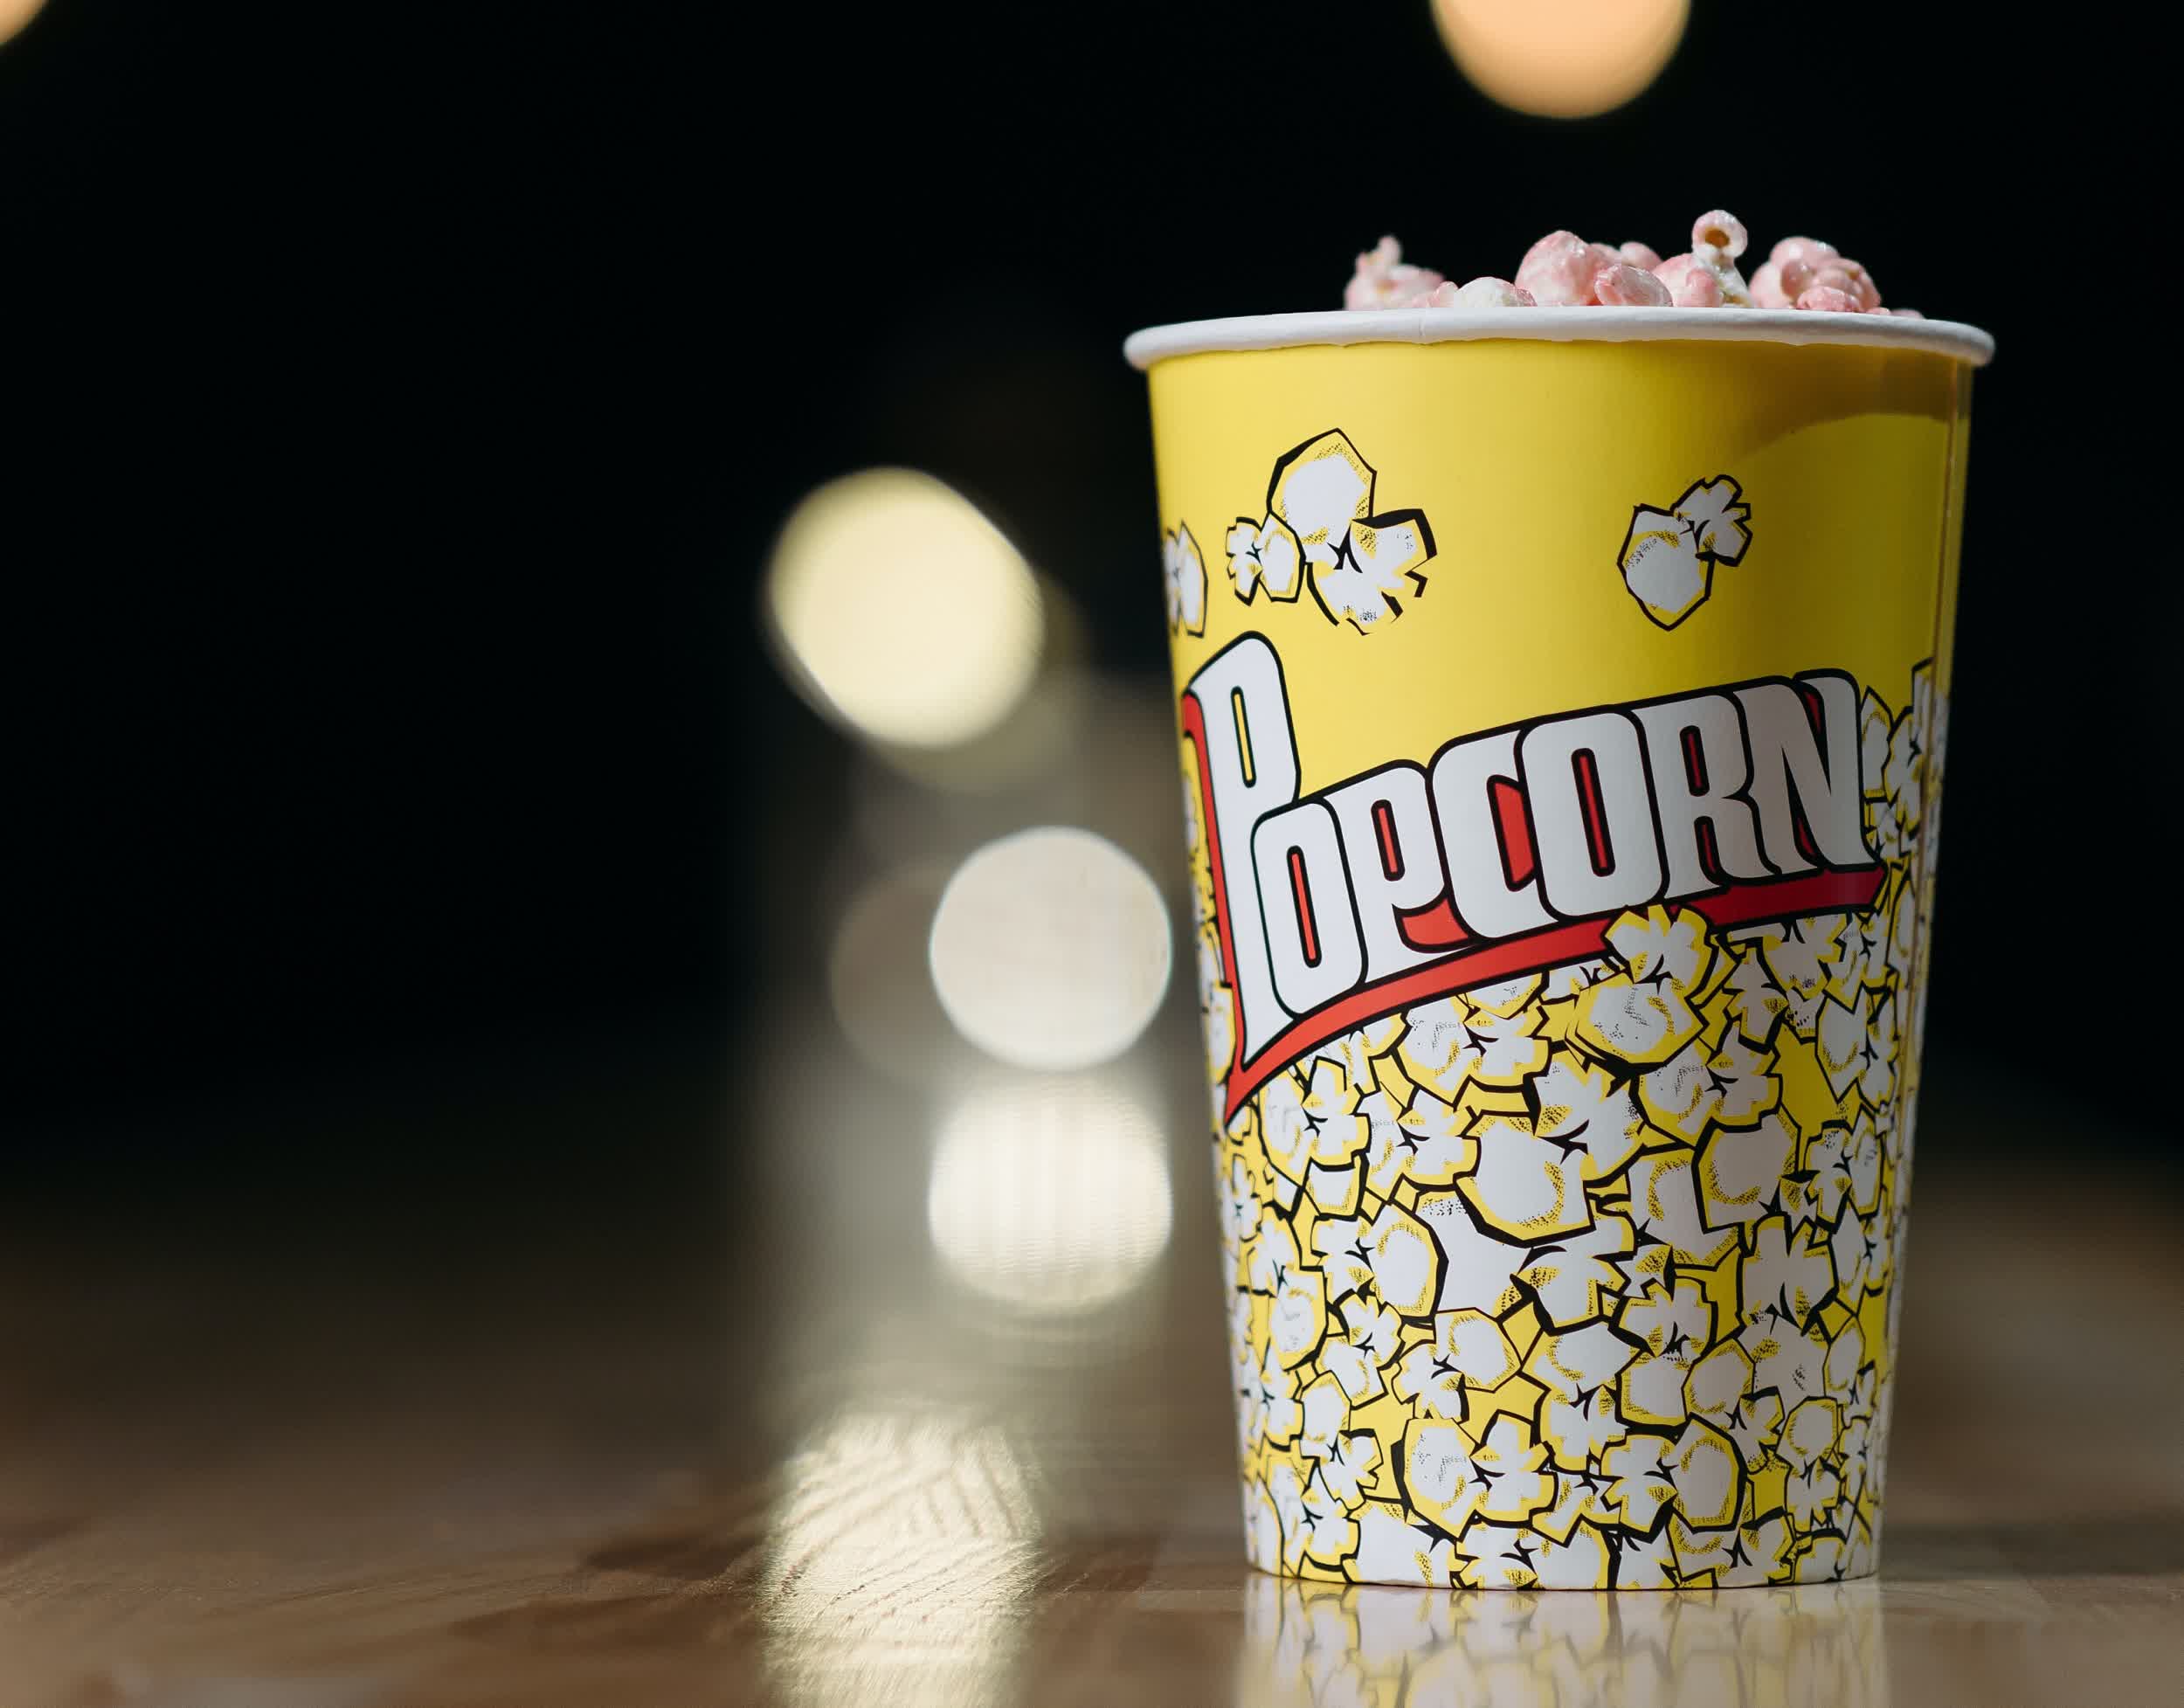 Popcorn Time shuts down due to lack of activity